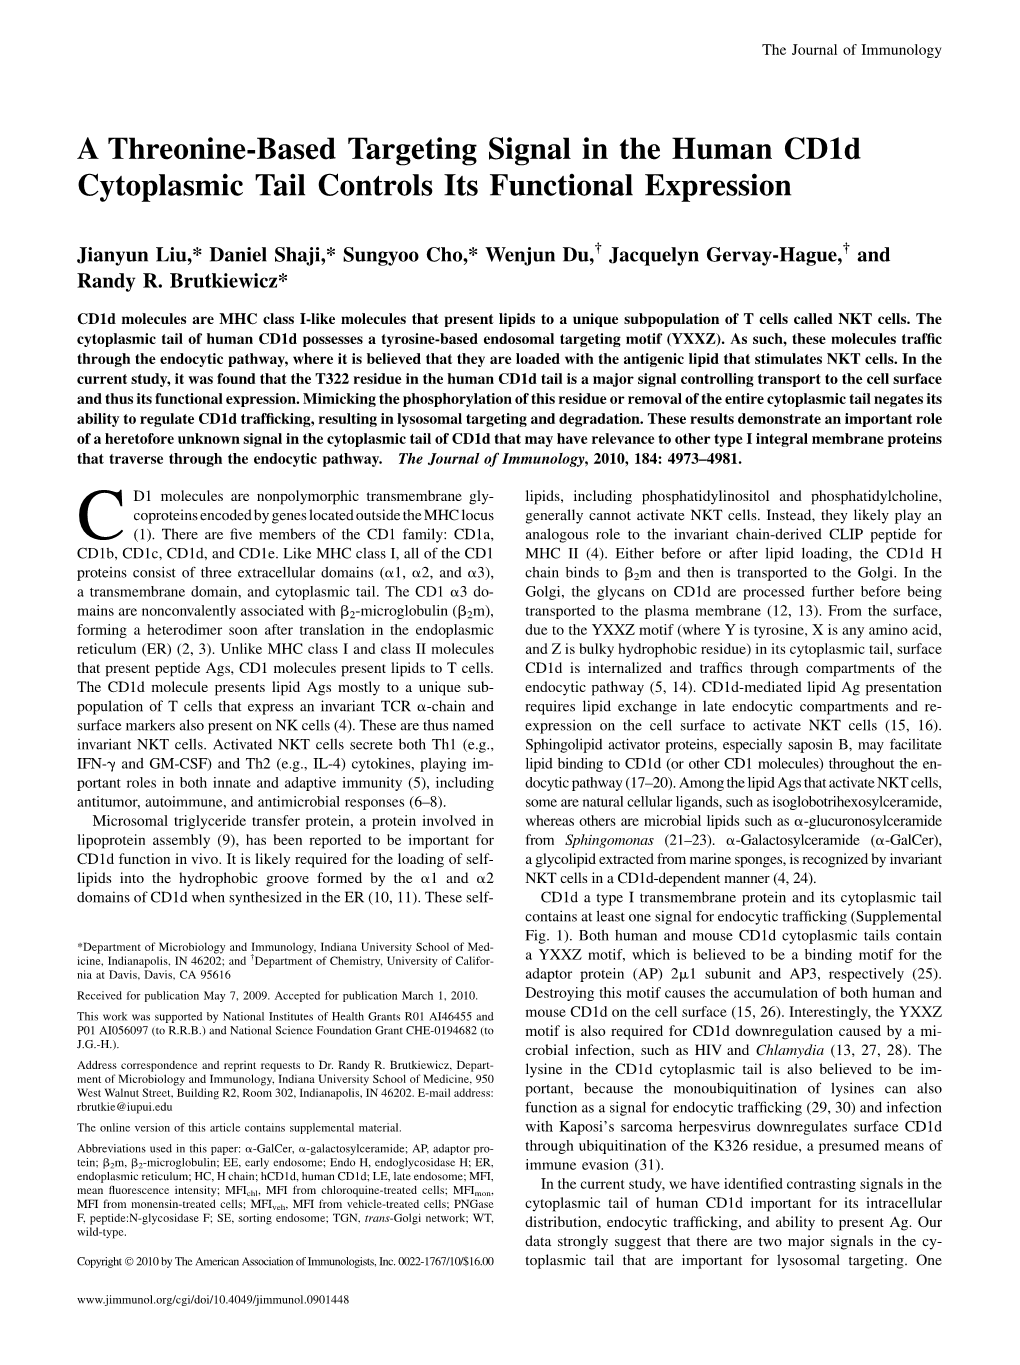 Functional Expression Human Cd1d Cytoplasmic Tail Controls Its A